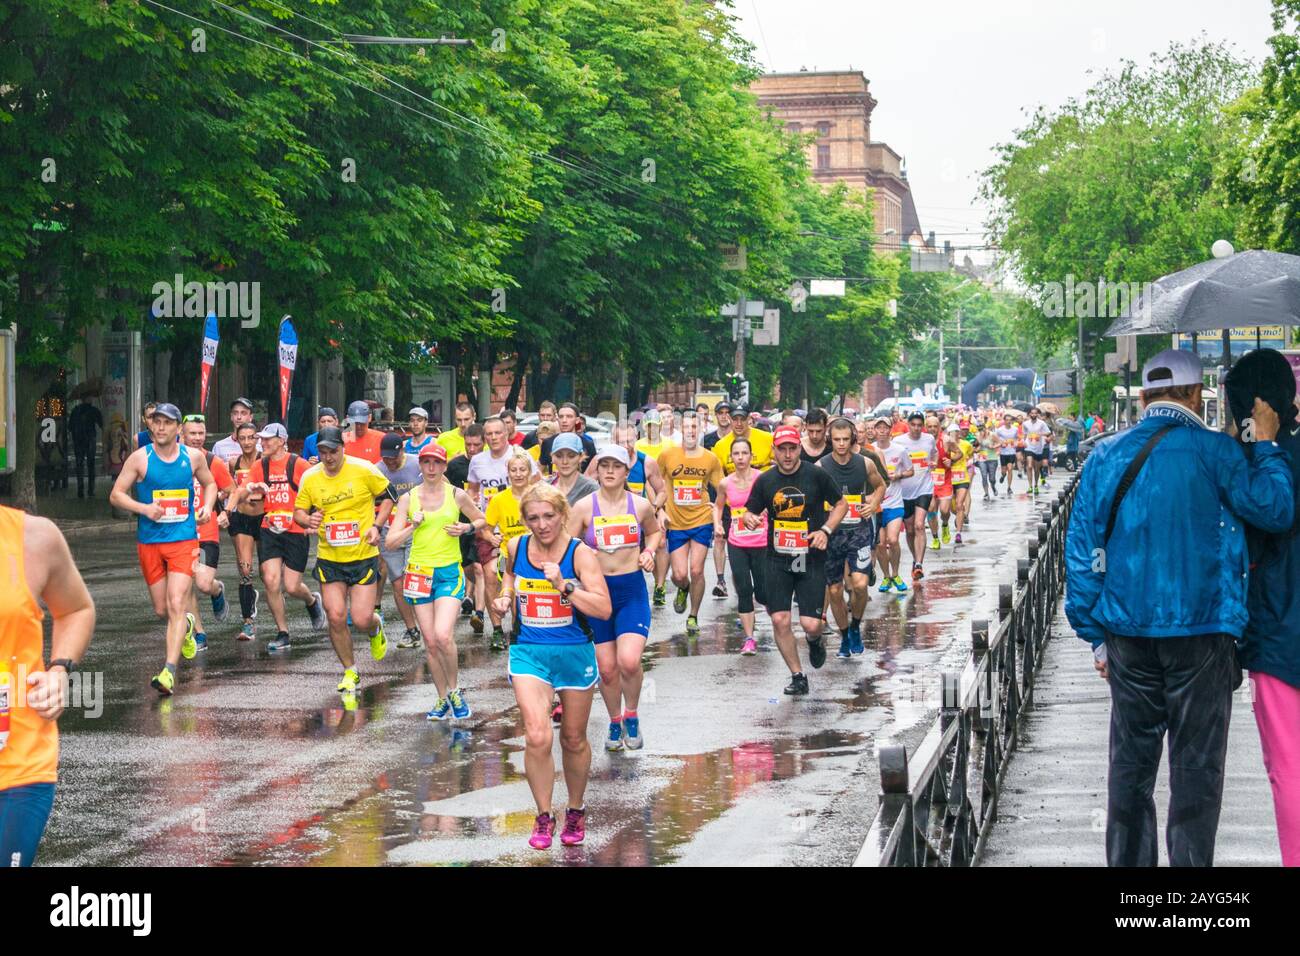 Dnepr, Ukraine - May 20, 2018:Men and women run an amateurish marathon through the streets of the city. Promoting a healthy lifestyle. Stock Photo